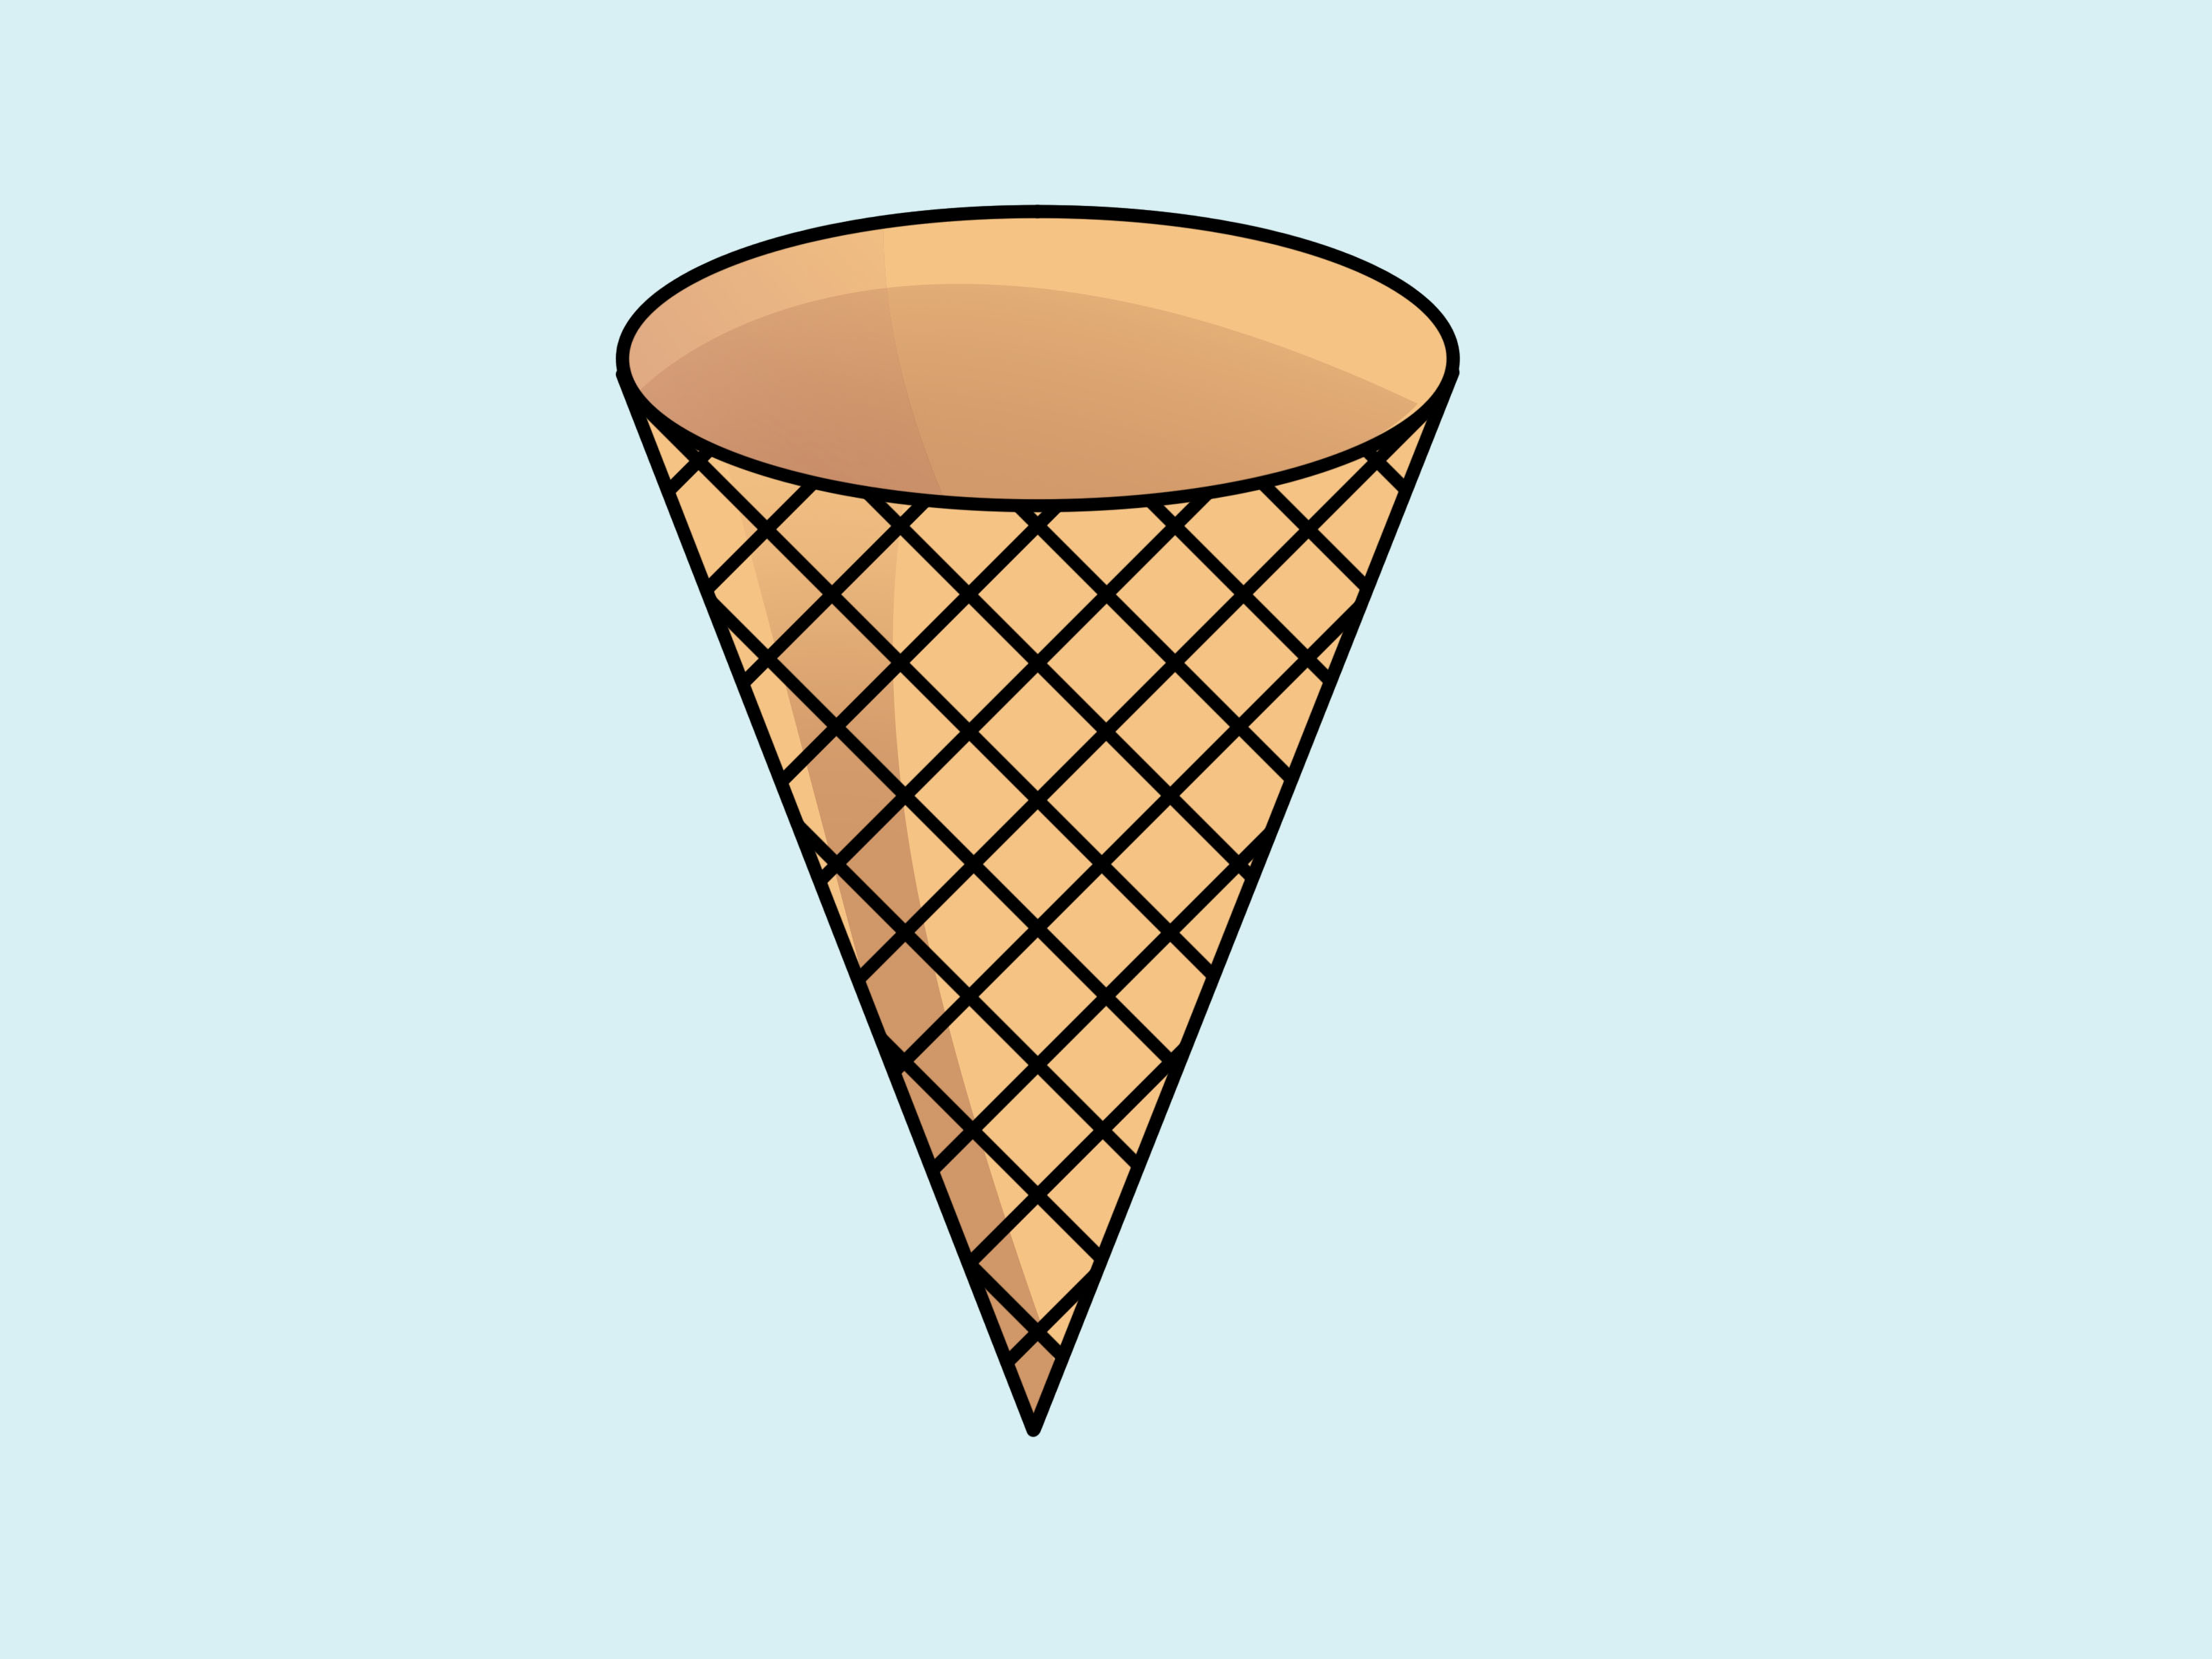 Free Pictures Of An Ice Cream Cone, Download Free Pictures Of An Ice